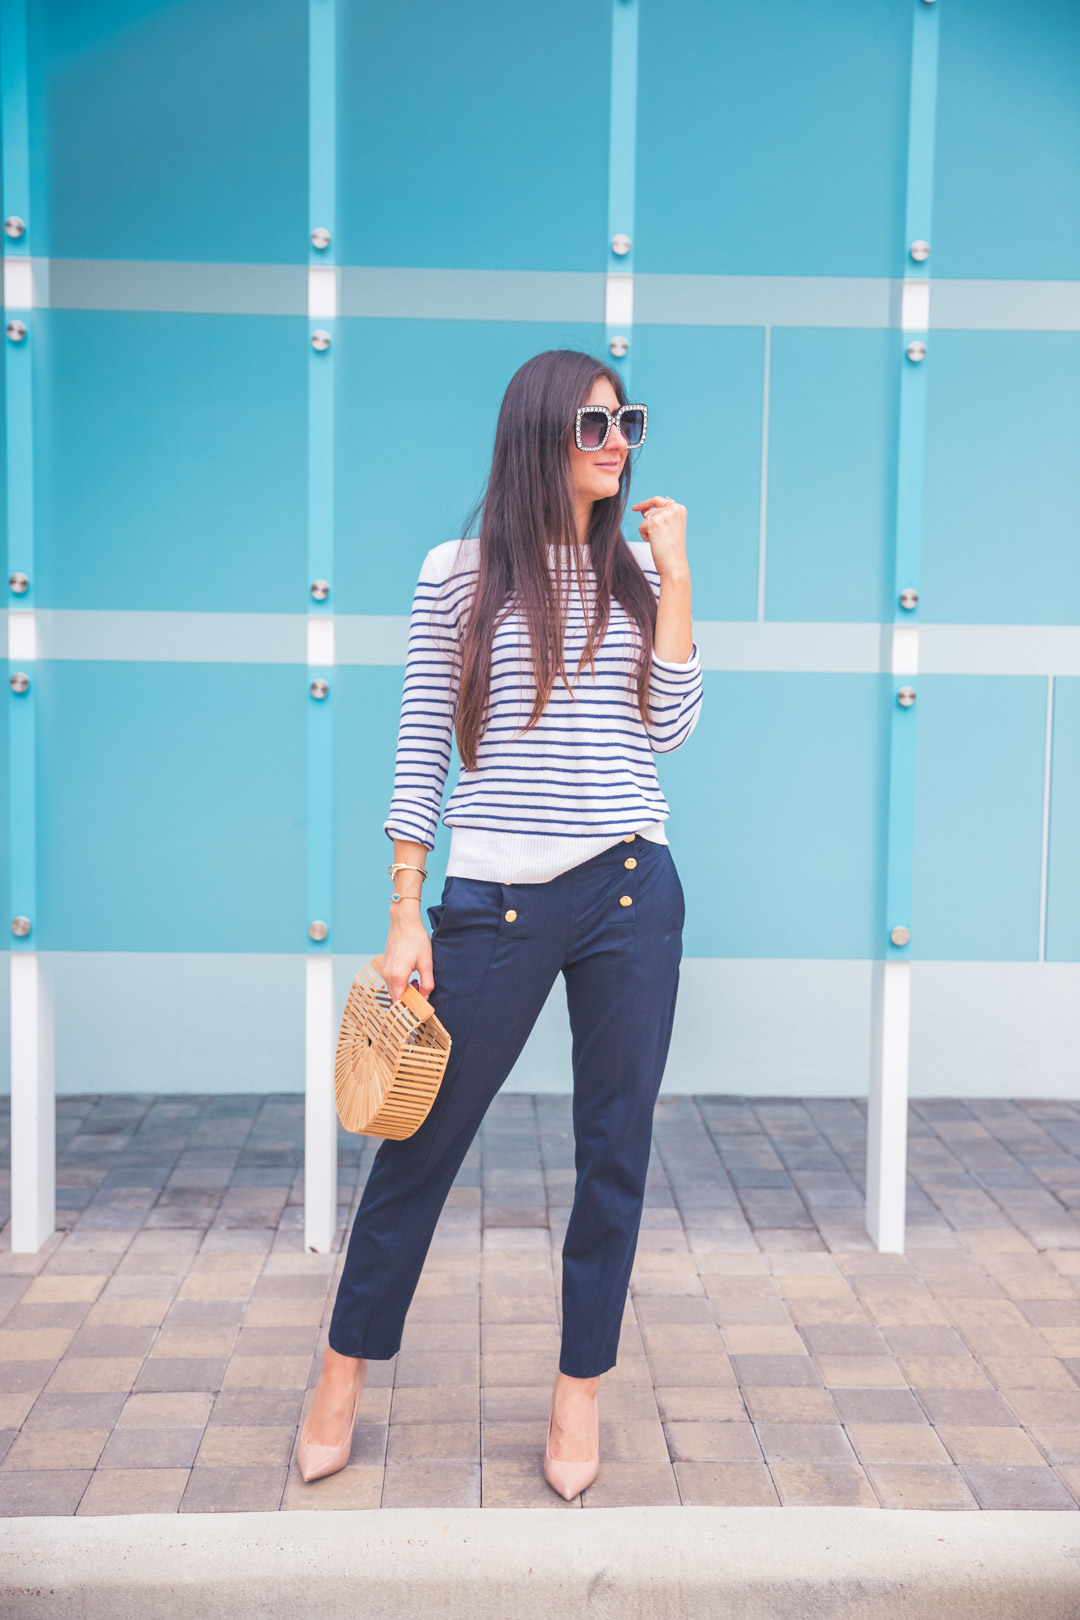 Cute Slacks for work that can be styled for fall: The Fashionable Maven